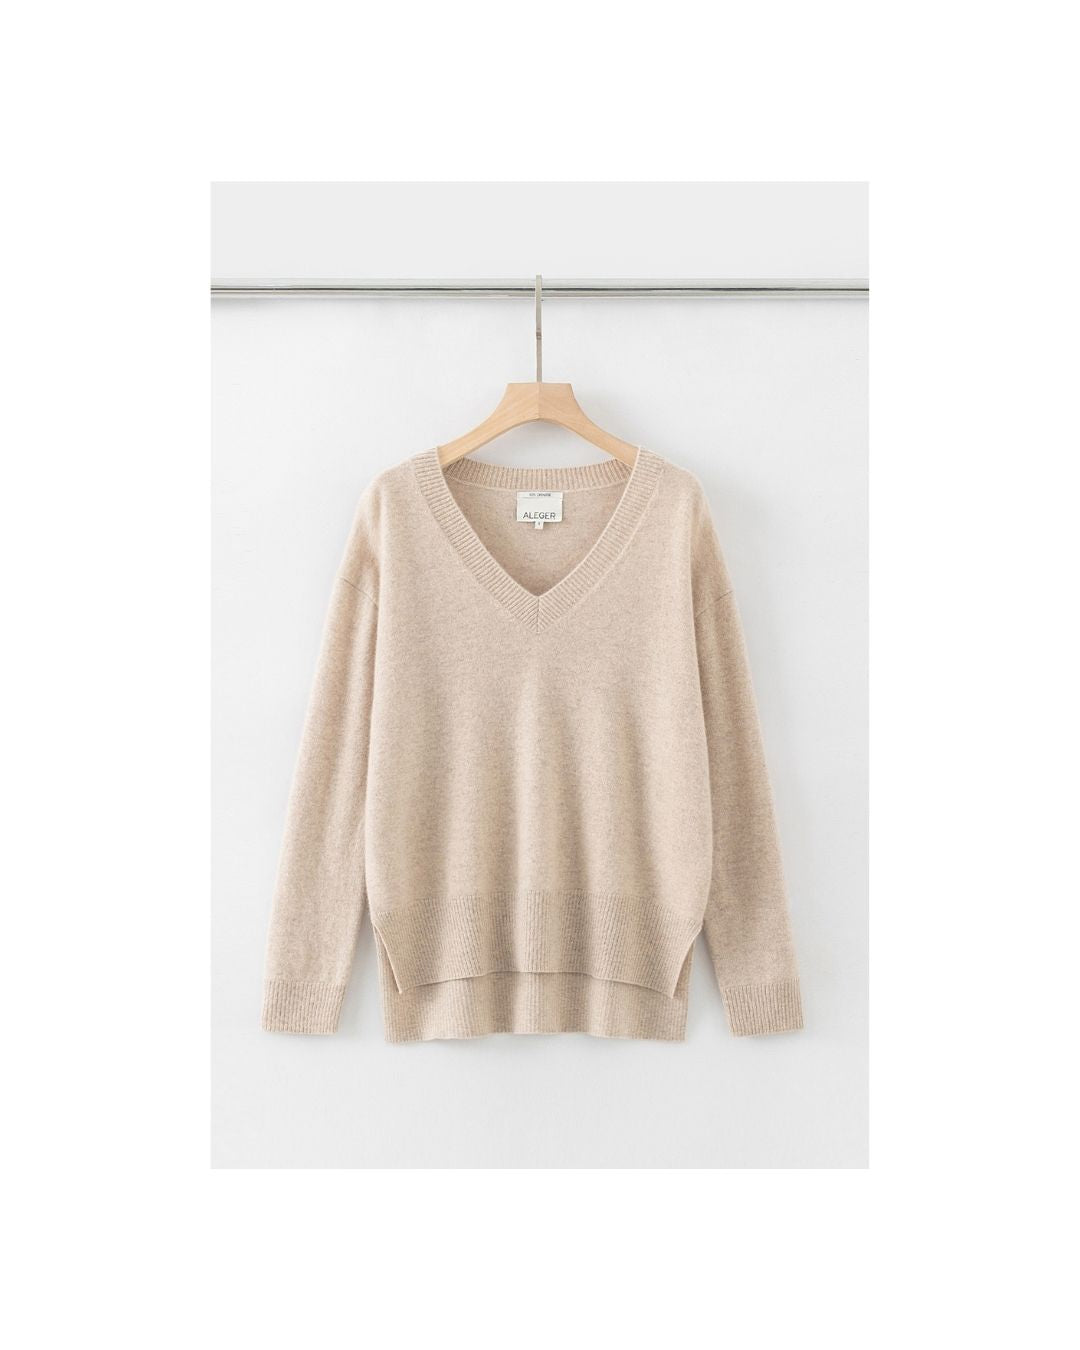 N.21 100% CASHMERE OVERSIZED HIGH LOW V NECK - CHAMPAGNE